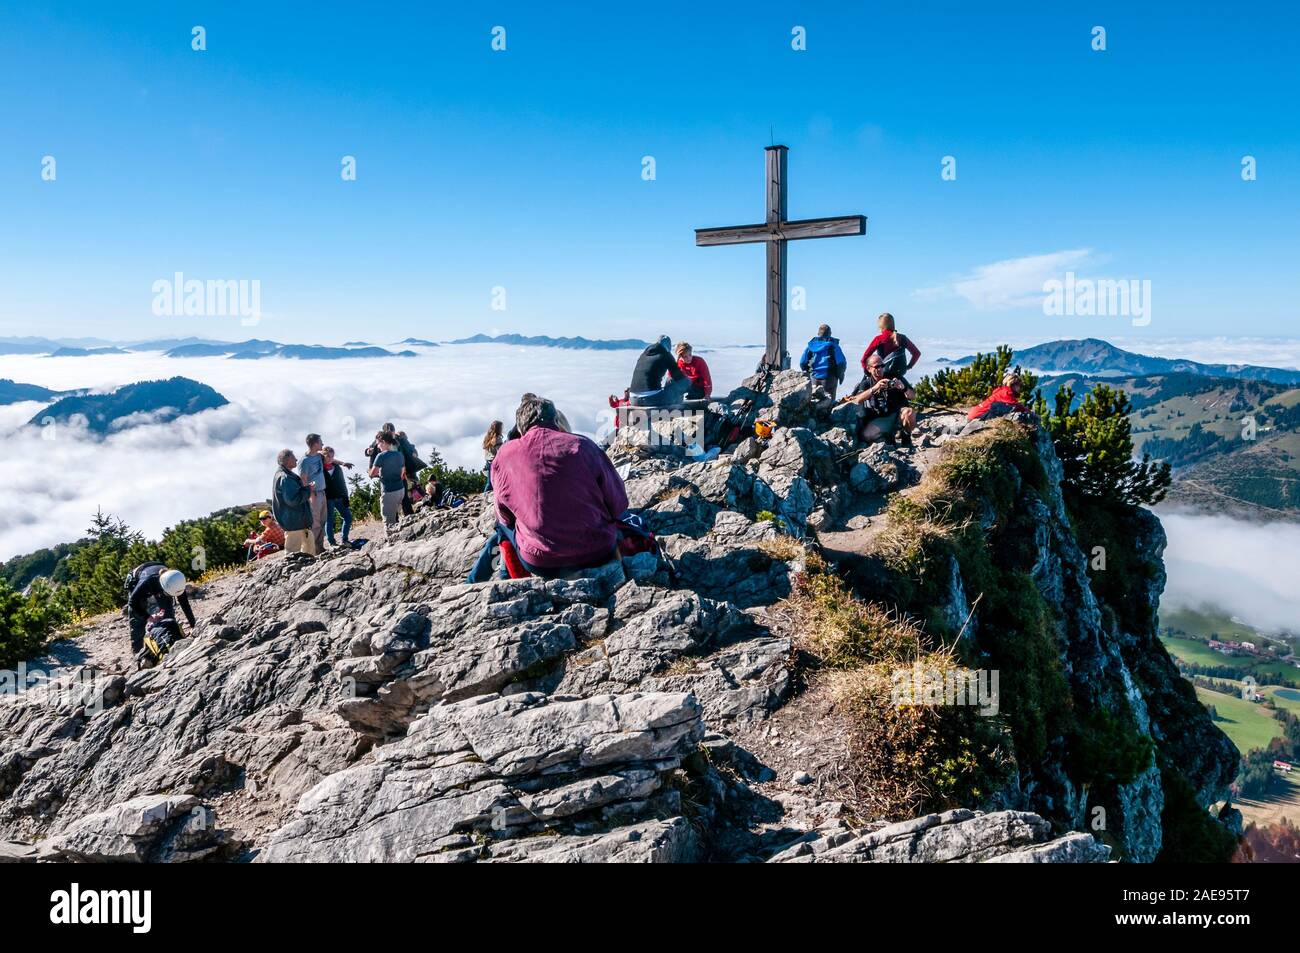 At the summit of Mt Iseler with summit cross, hikers, mountaineers, near Oberjoch, Allgaeu, Bavaria, Germany Stock Photo